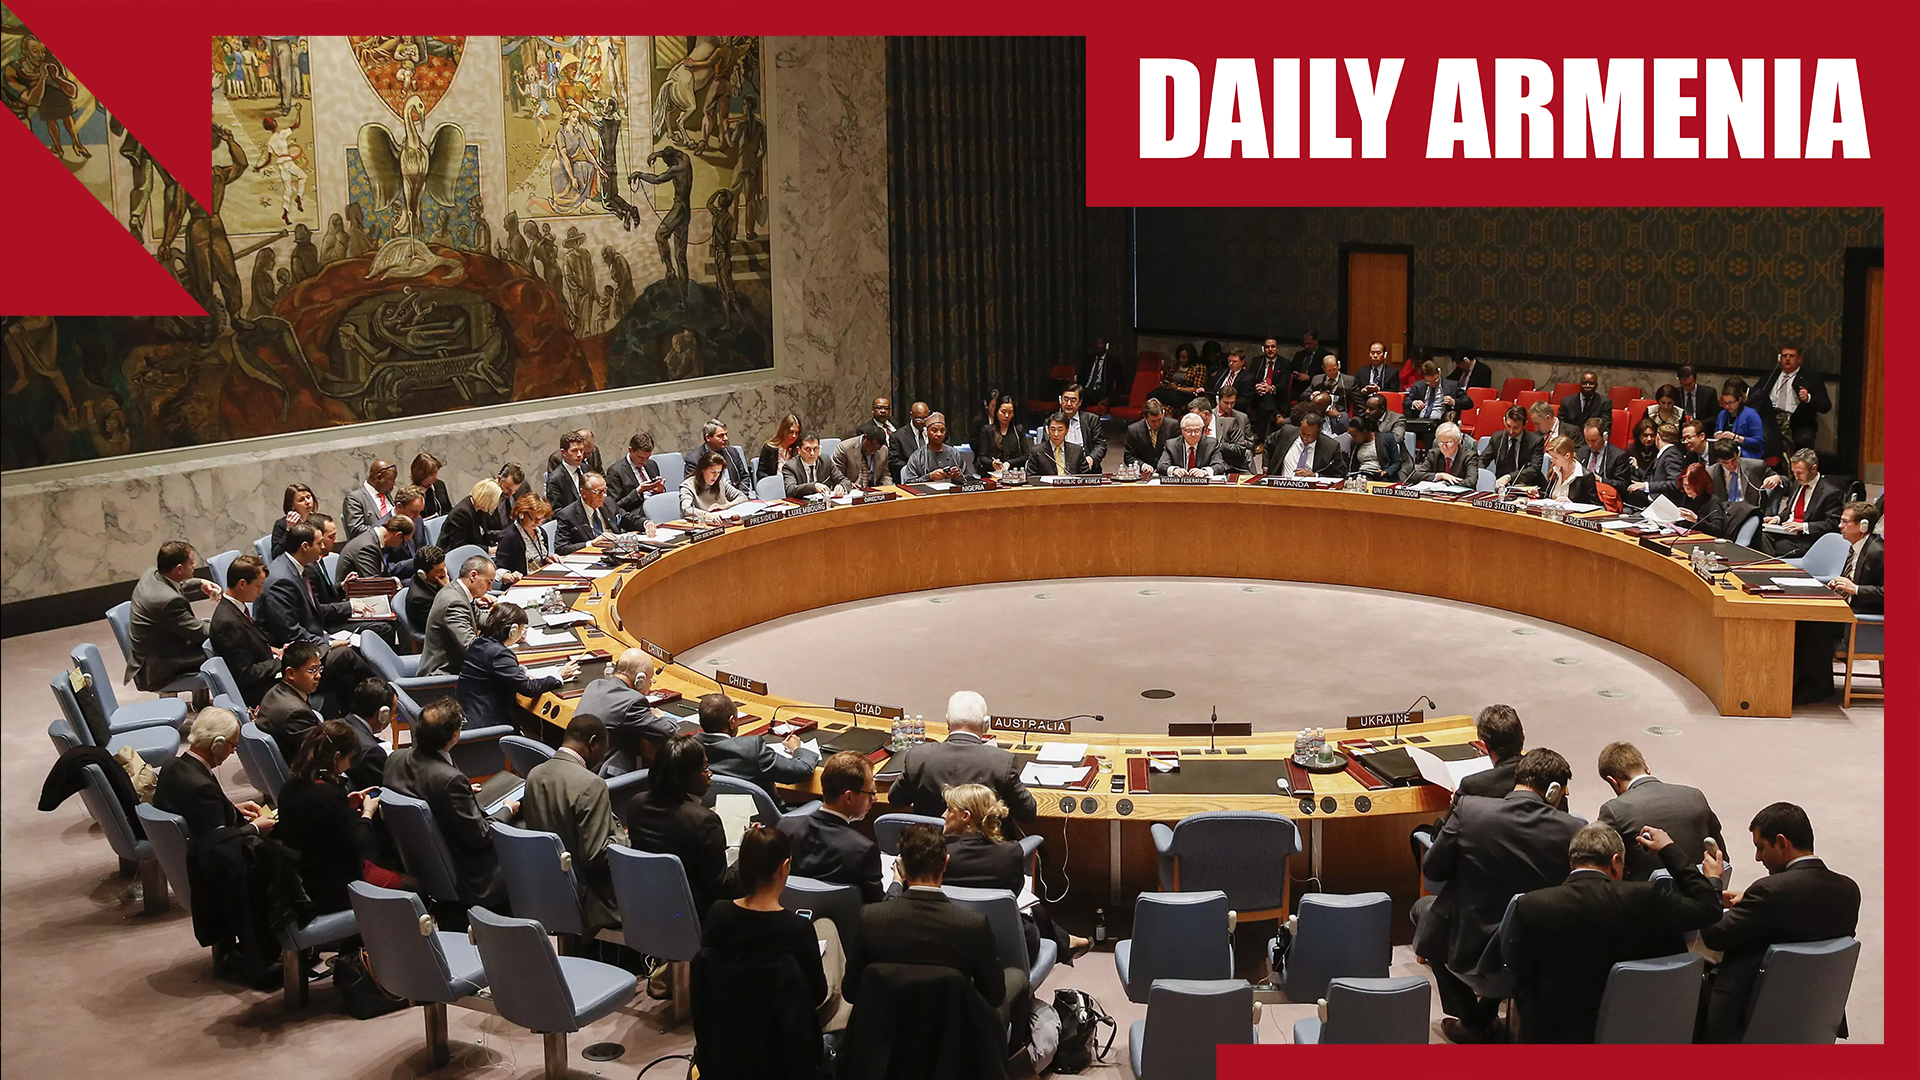 UN Security Council to hold emergency meeting on Karabakh